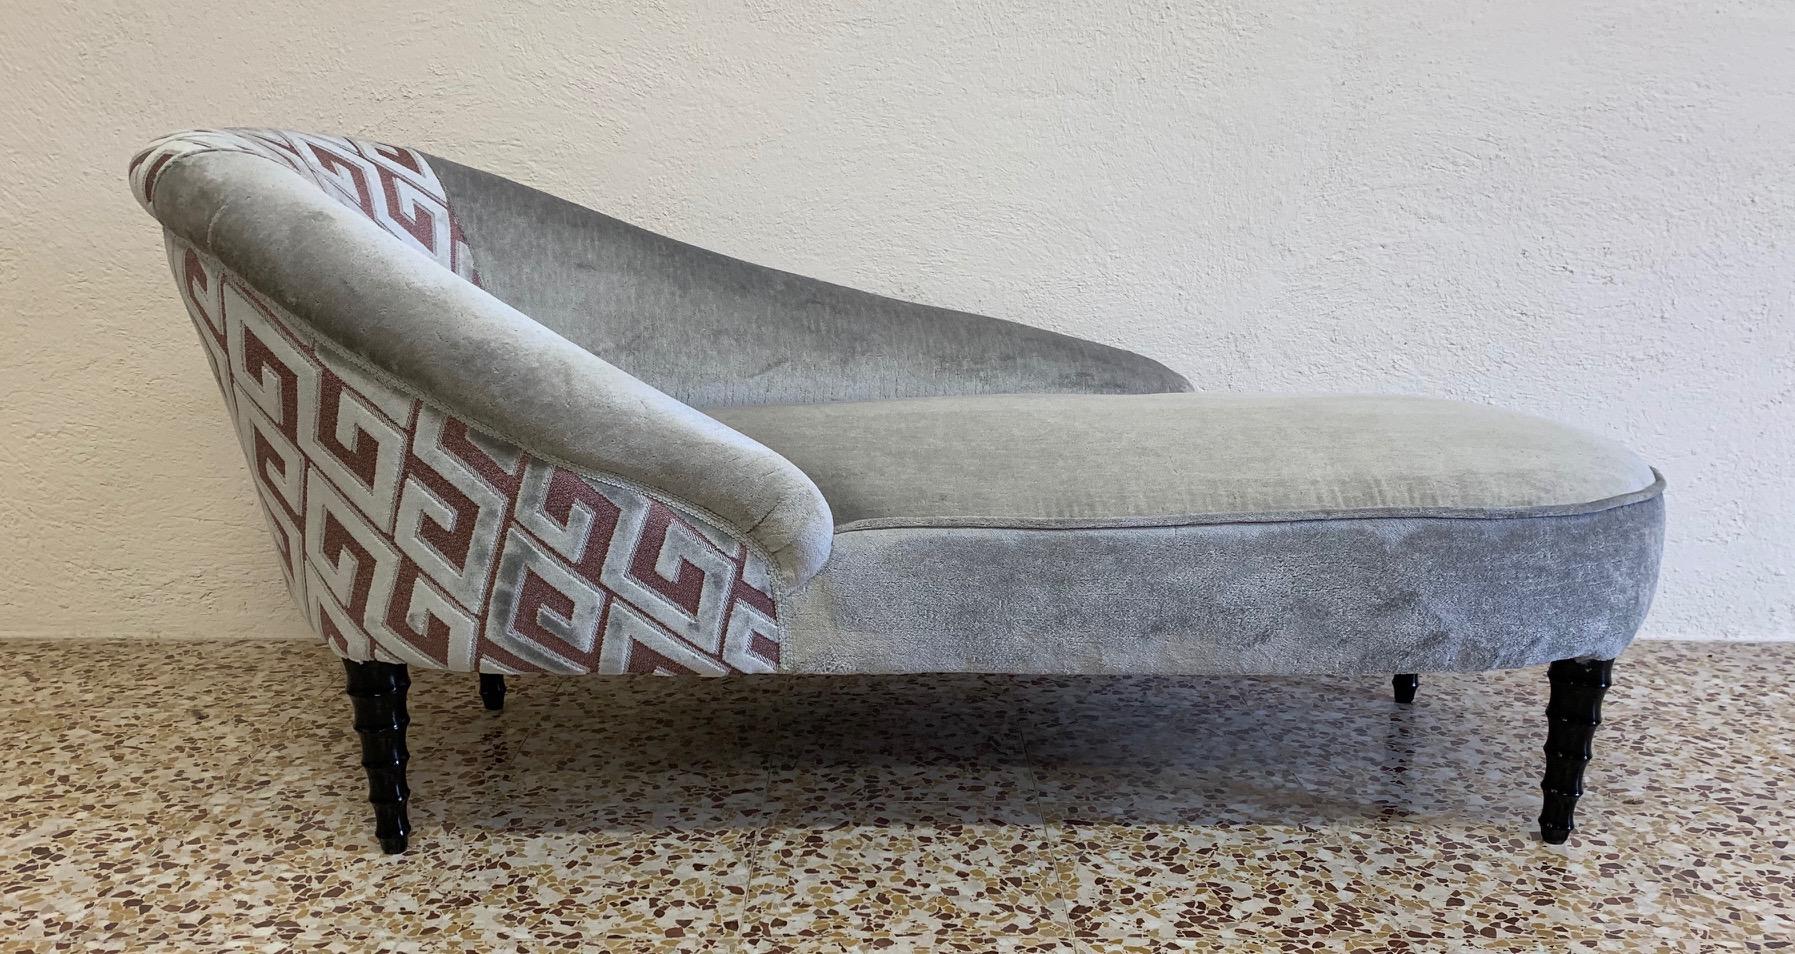 Elegant Italian chaise longue from the 1940s.
It has been restuffed and upholstered in high quality Italian velvet.
The wooden feet are black lacquered.